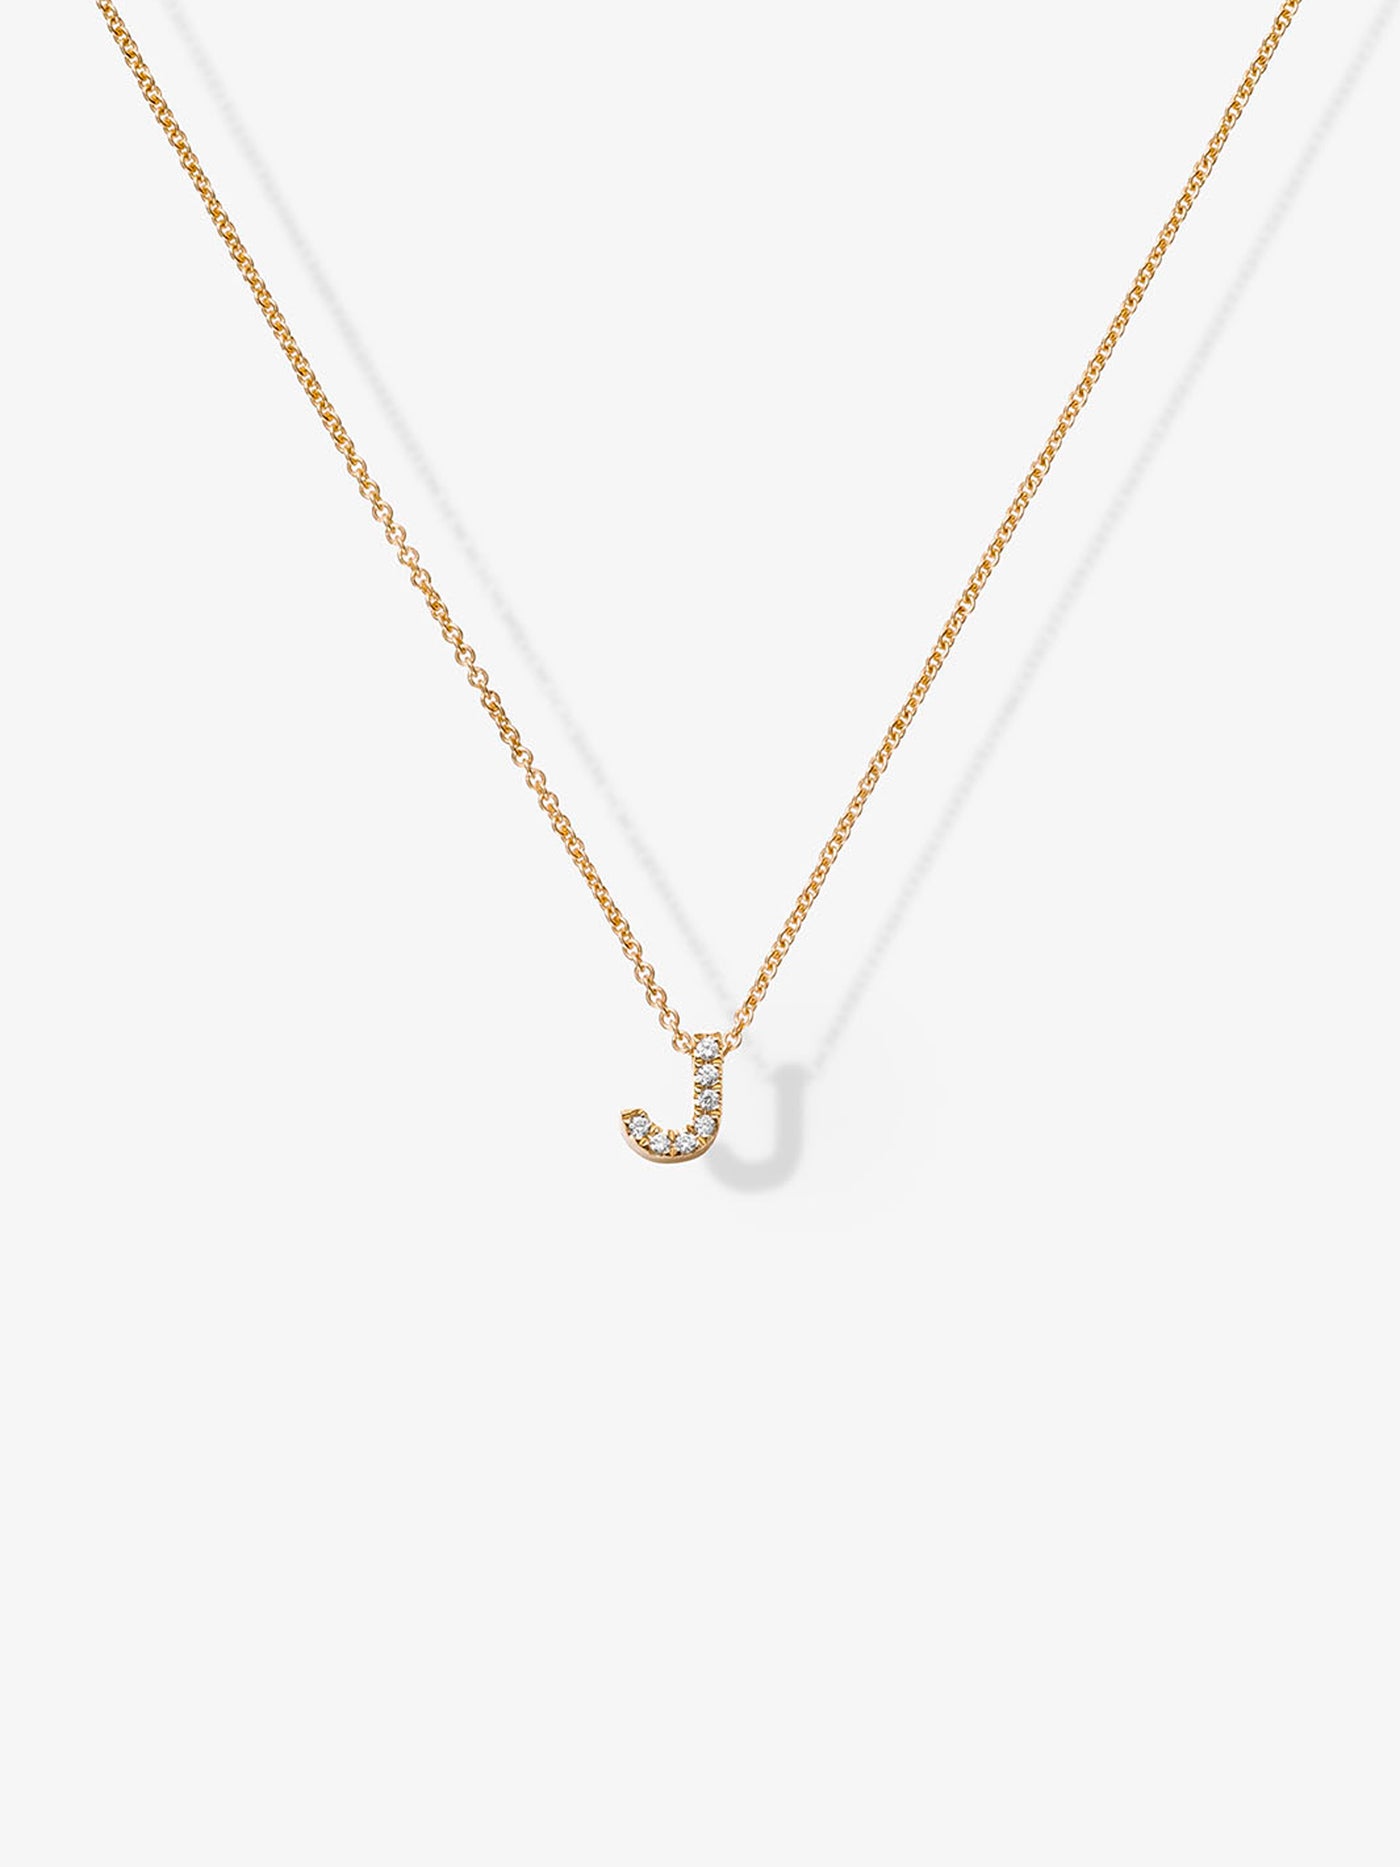 Letter J Necklace in Diamonds and 18k Gold